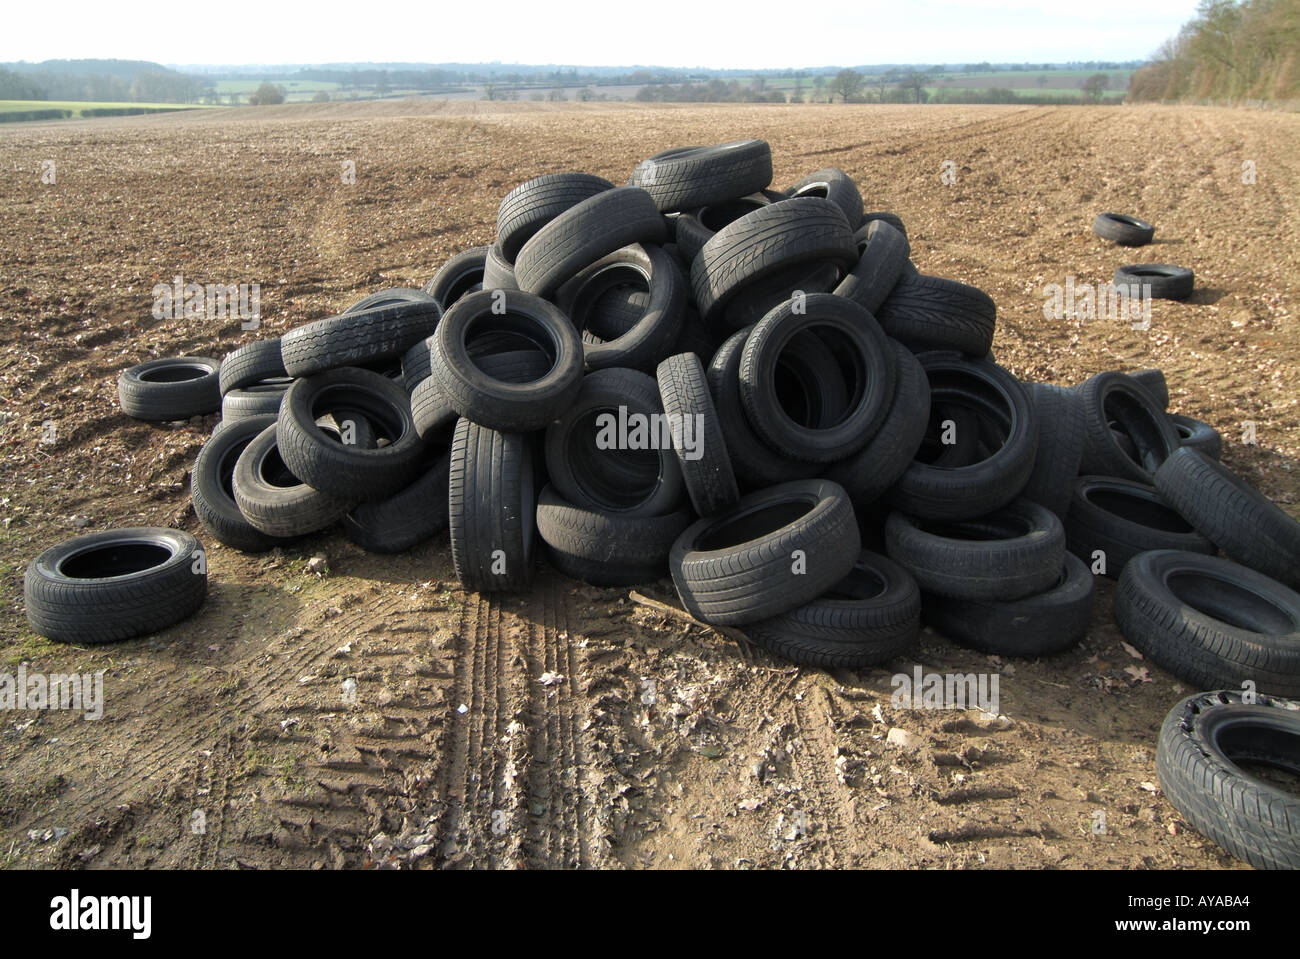 Illegal fly tipping of vehicle tyres dumped in farm field to avoid paying disposal charges flytipping big problem in countryside Essex Engalnd UK Stock Photo